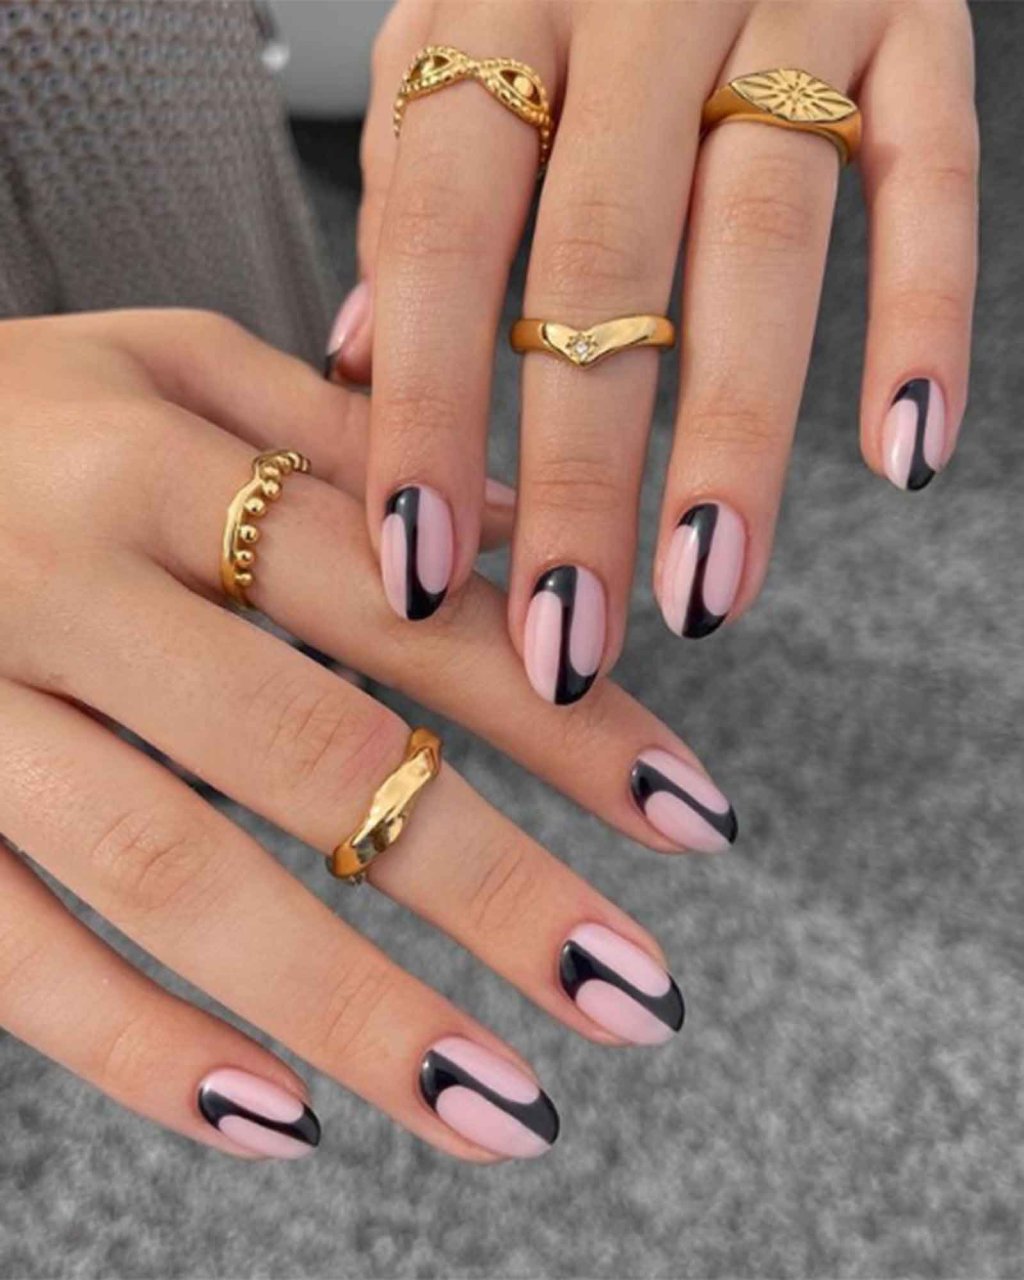 4 Women Honestly Review Gel-X Manicures (+ 42 Nail Art Ideas We